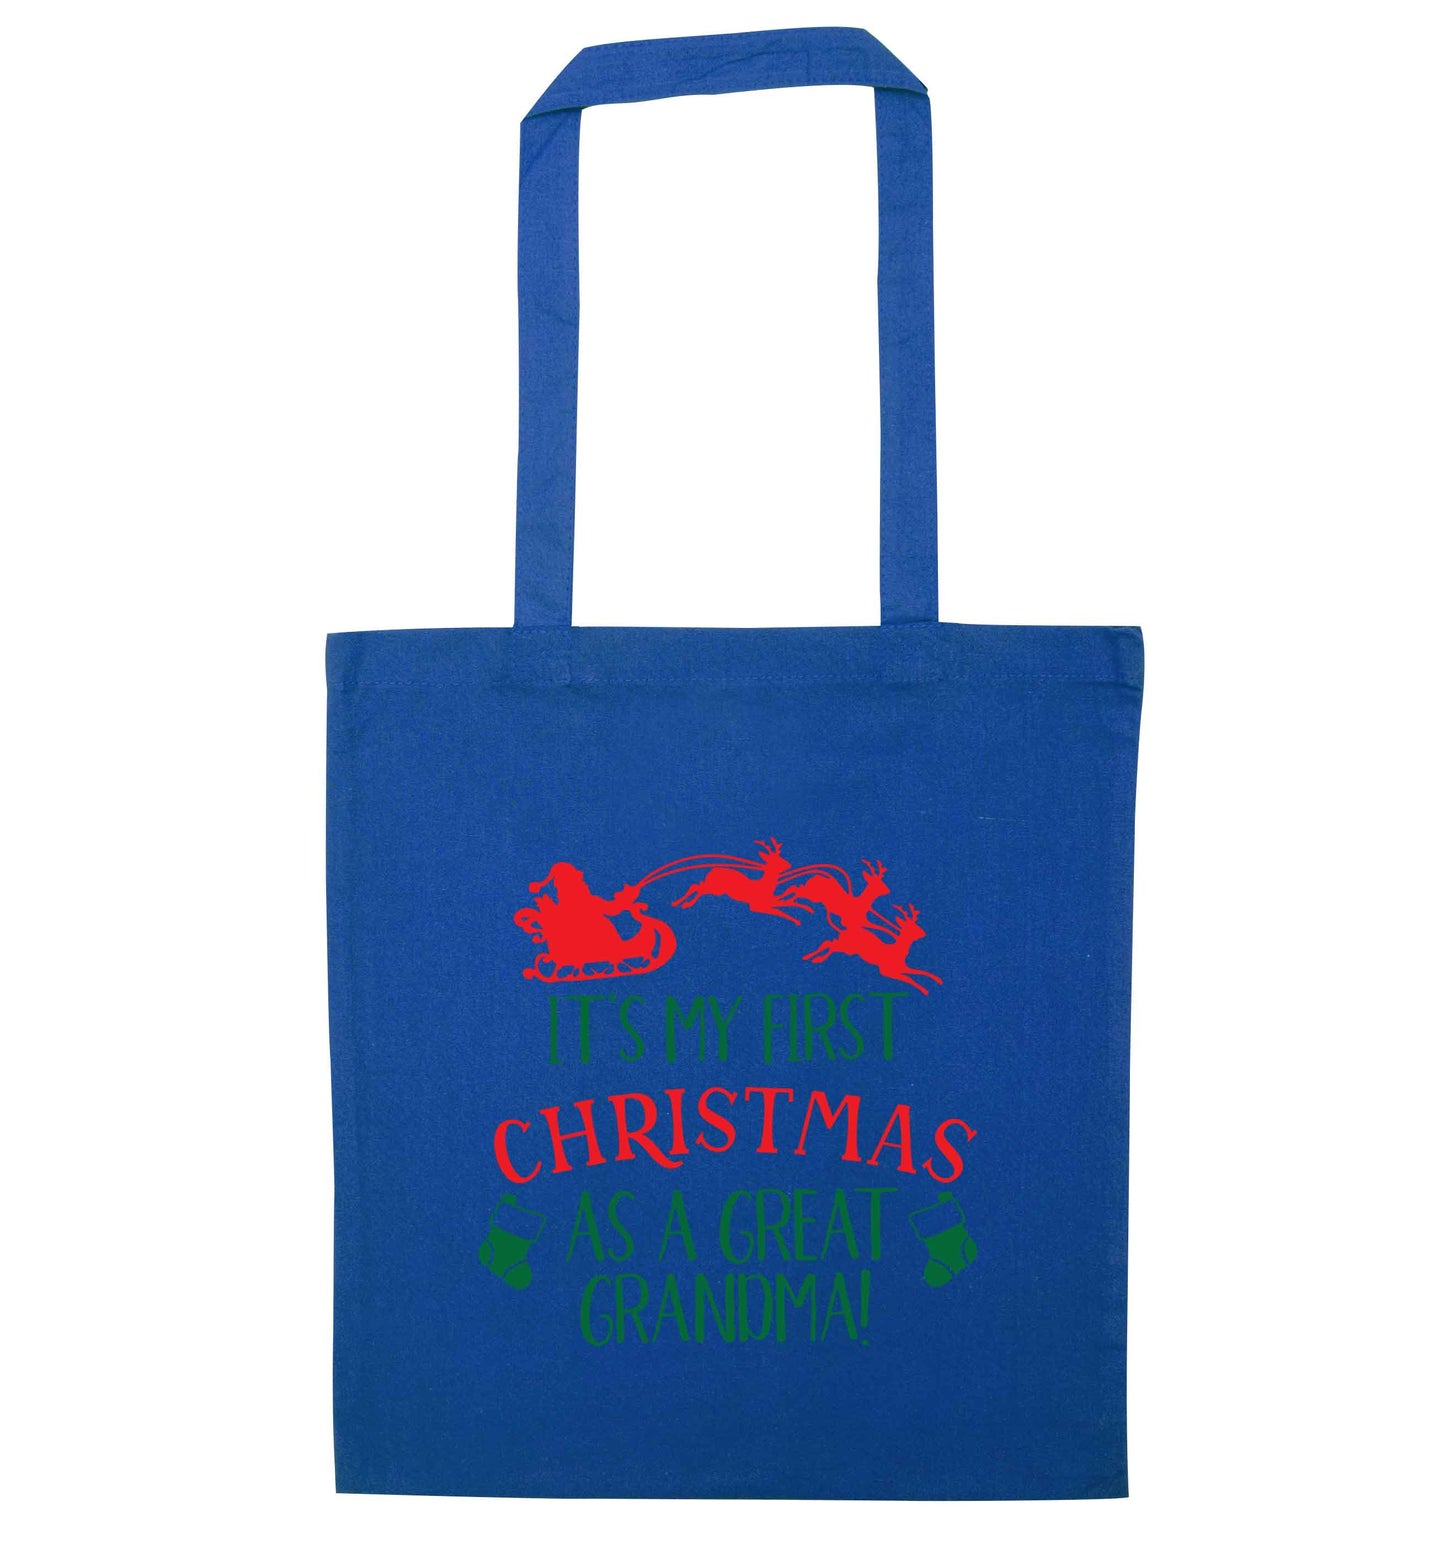 It's my first Christmas as a great grandma! blue tote bag